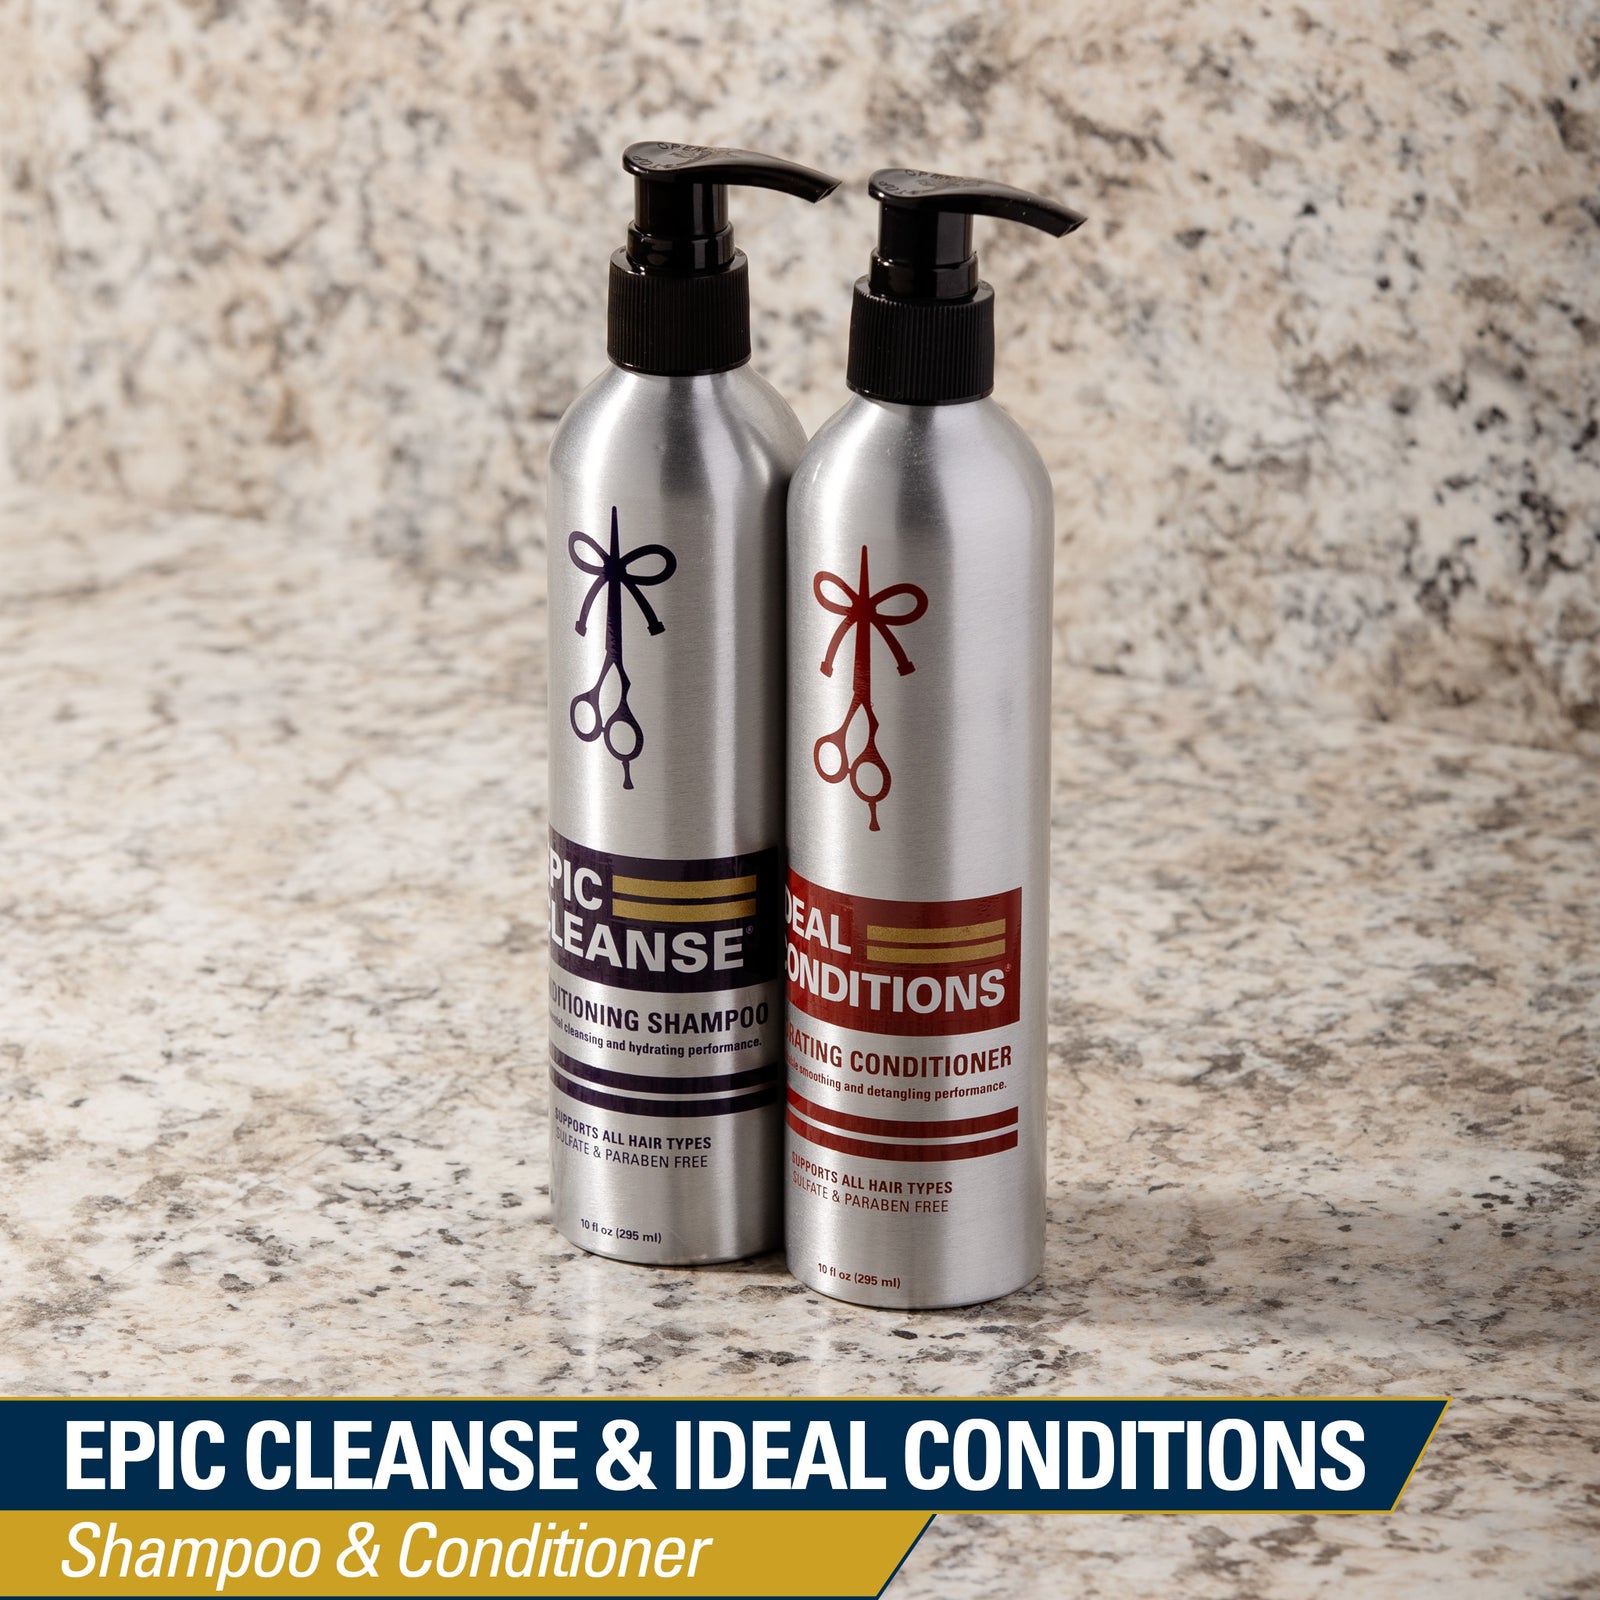 The Longhairs Epic Cleanse & Ideal Conditions Shampoo & Conditioner